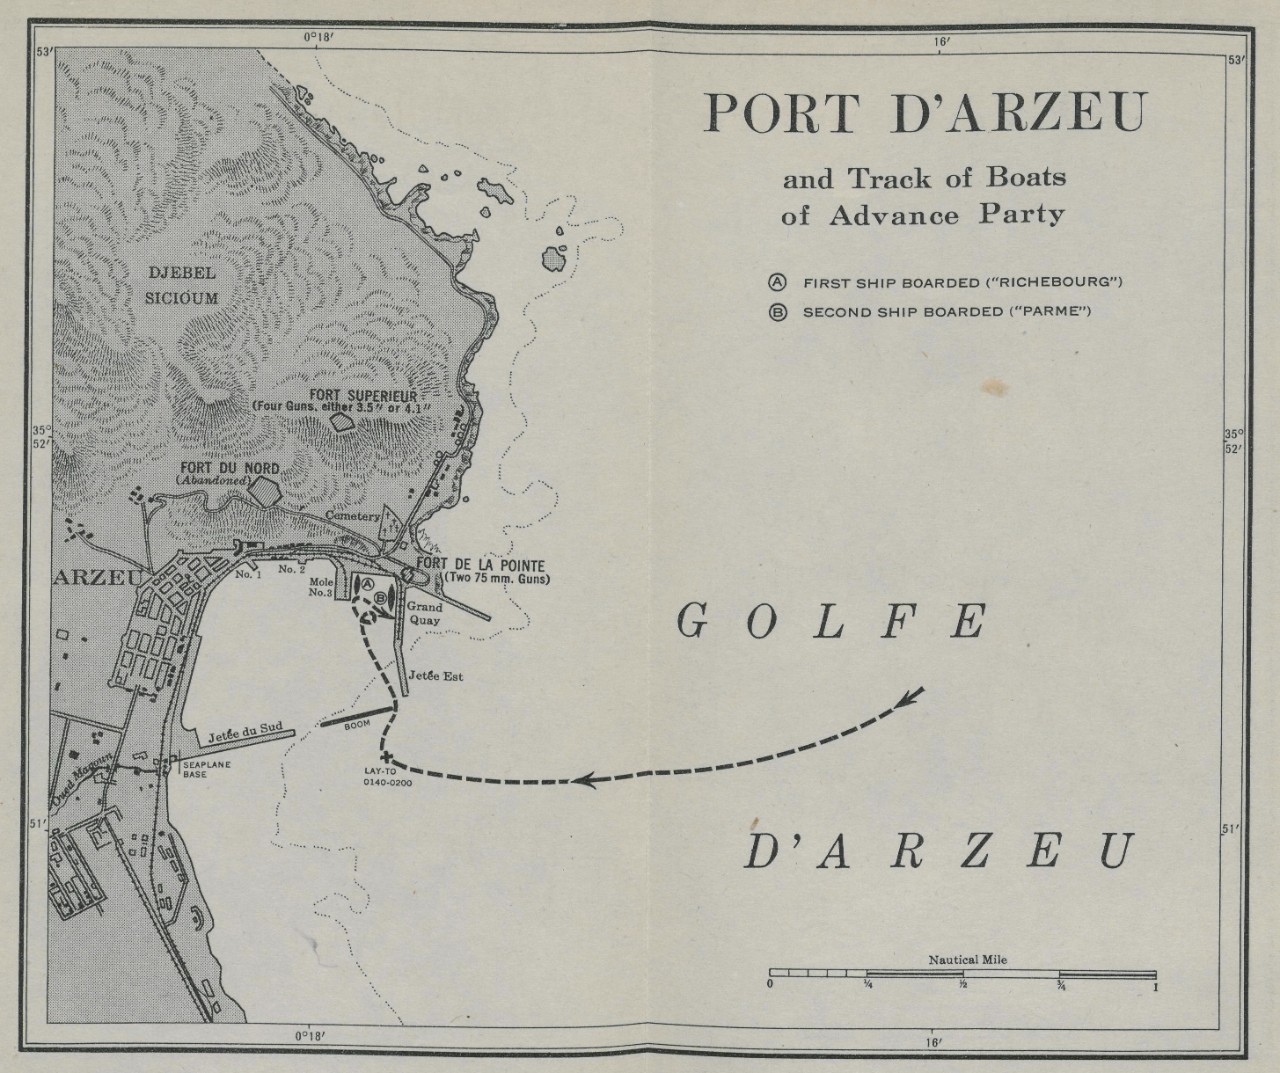 Port D'Arzeu and Track of Boats of Advance Party